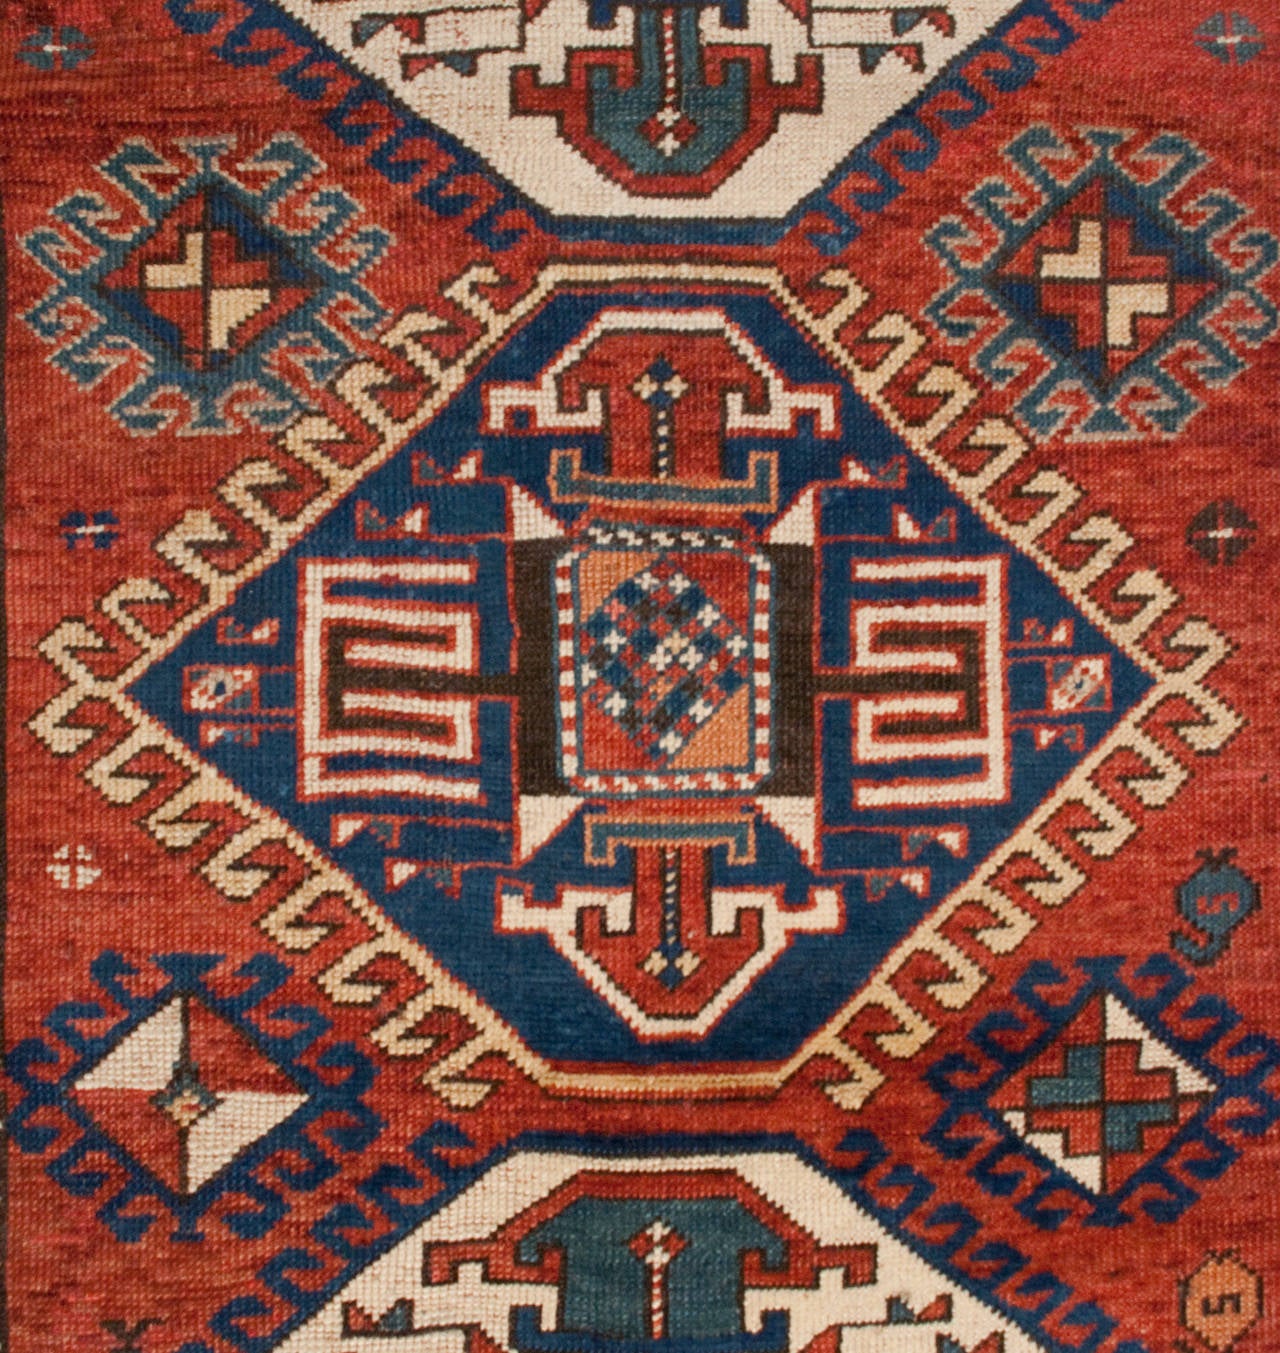 A late 19th century Persian Kazak rug with four wonderful diamond medallions on a crimson field of flowers with goats, surrounded by multiple complementary geometric borders.